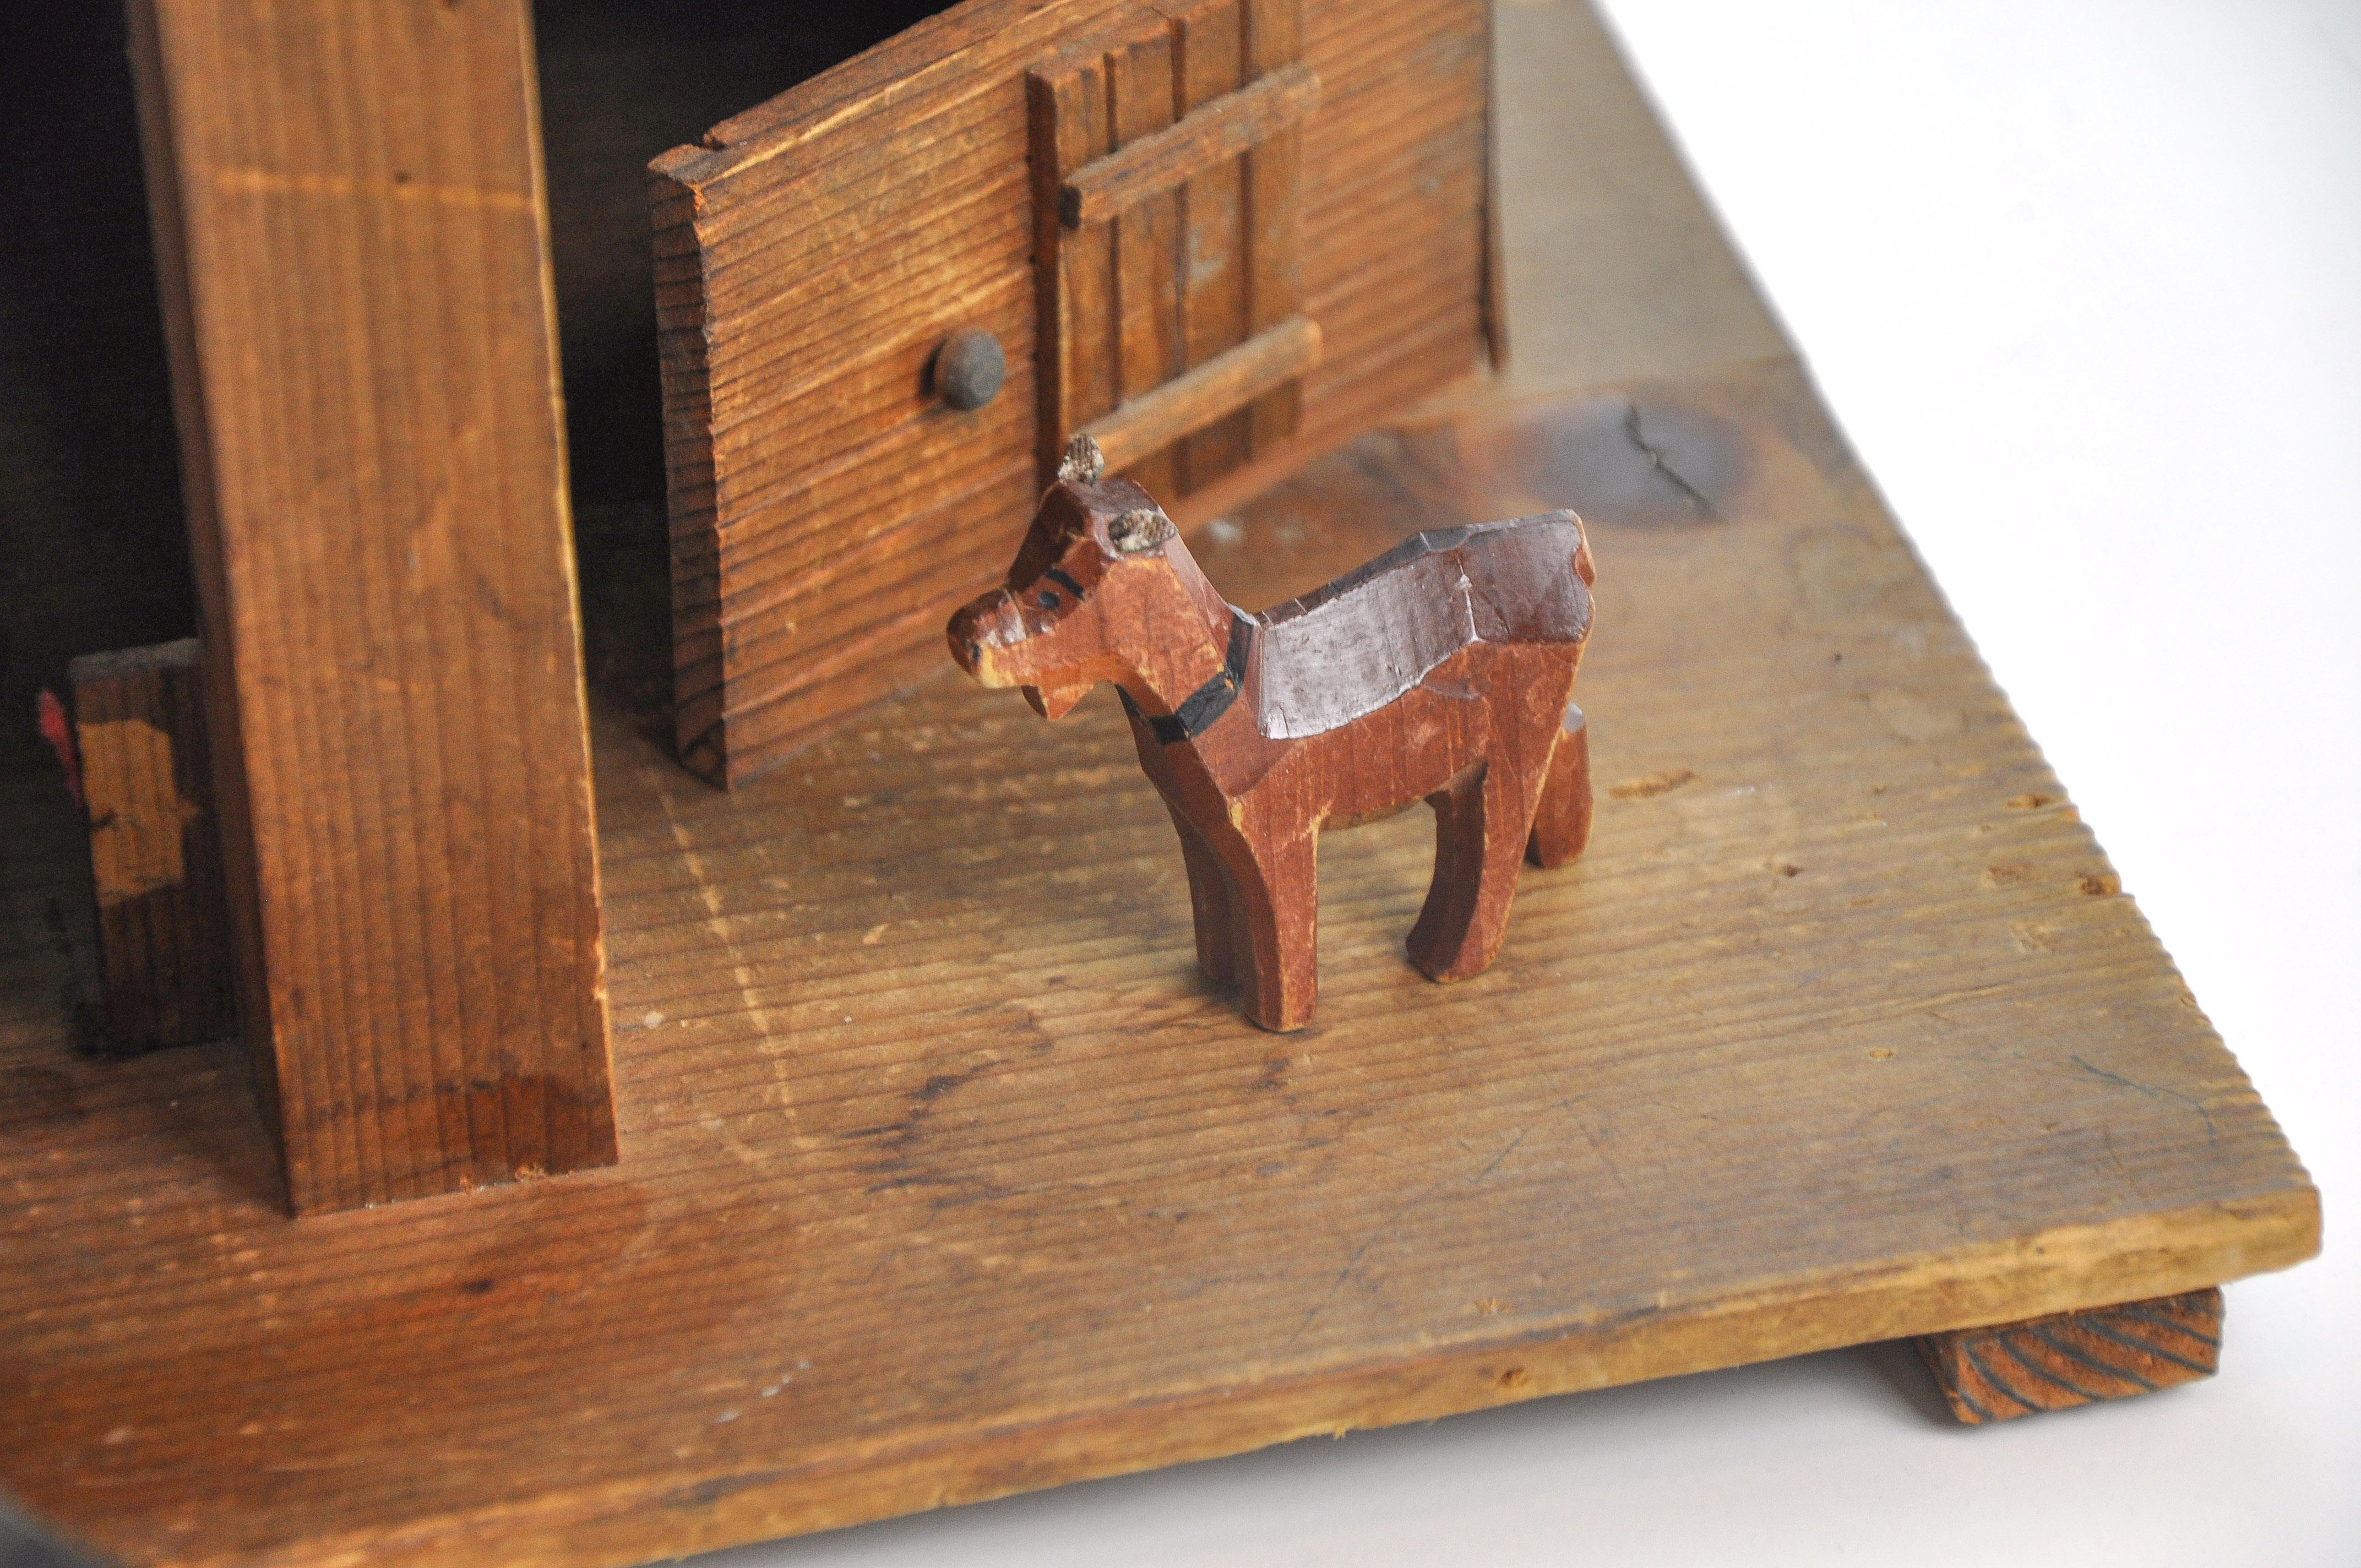 This wonderful hand carved old stabile made of solid wood from the Bernese Mountains with its 3 scale cows and a Goat from Trauffer, is not only suitable as a toy, but also as an unconventional decoration in the style of alpine Folk Art. A